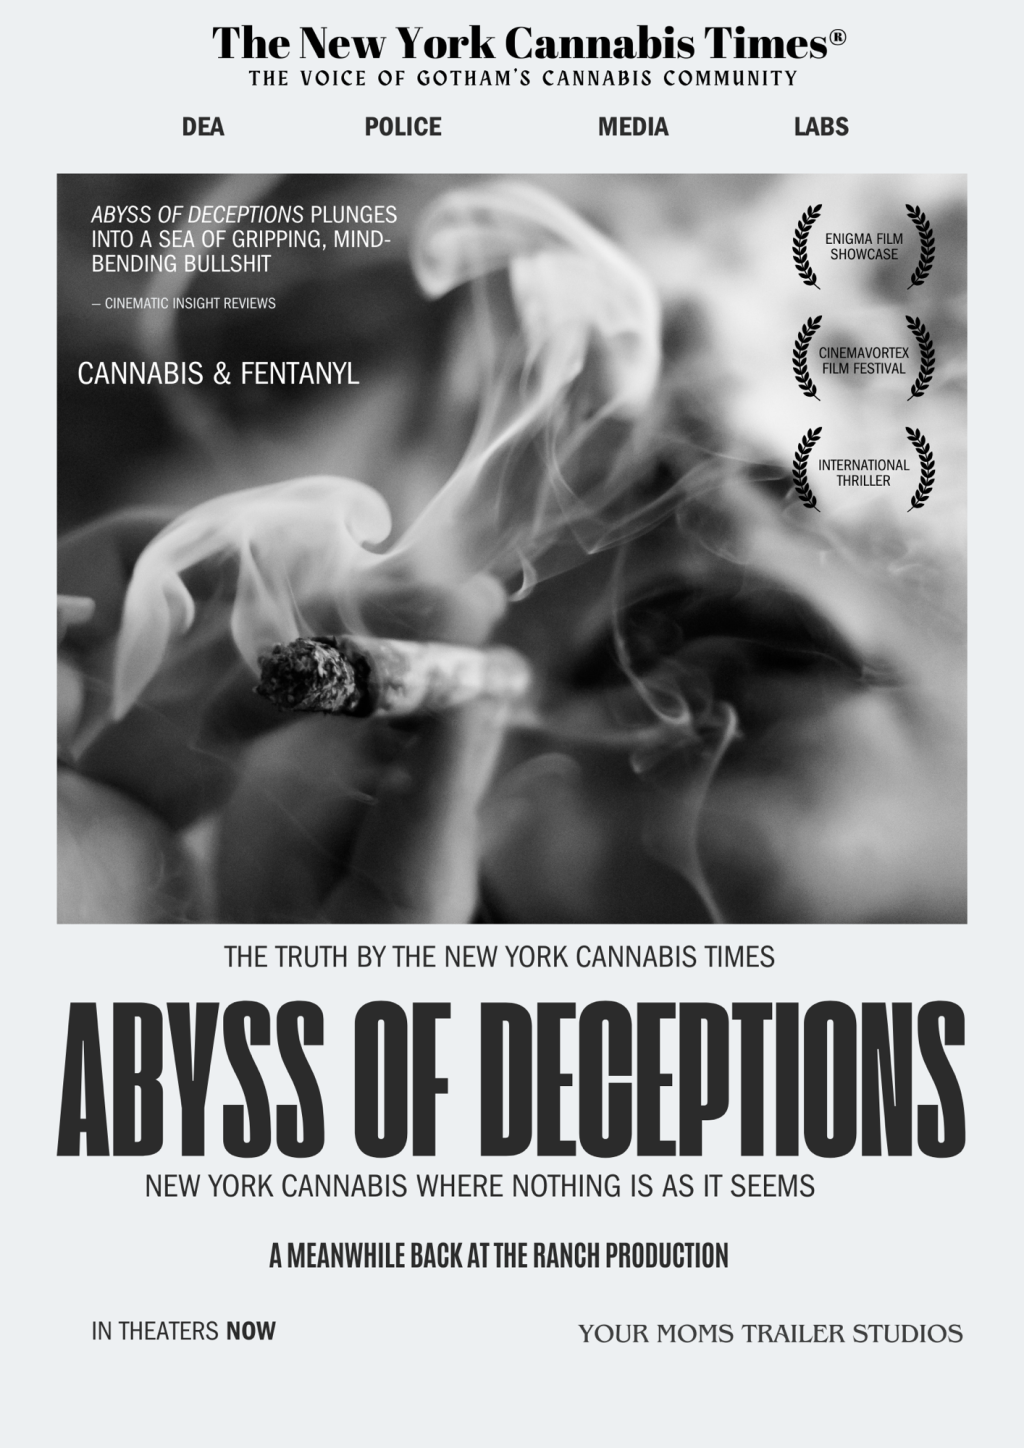 Abyss of Deception